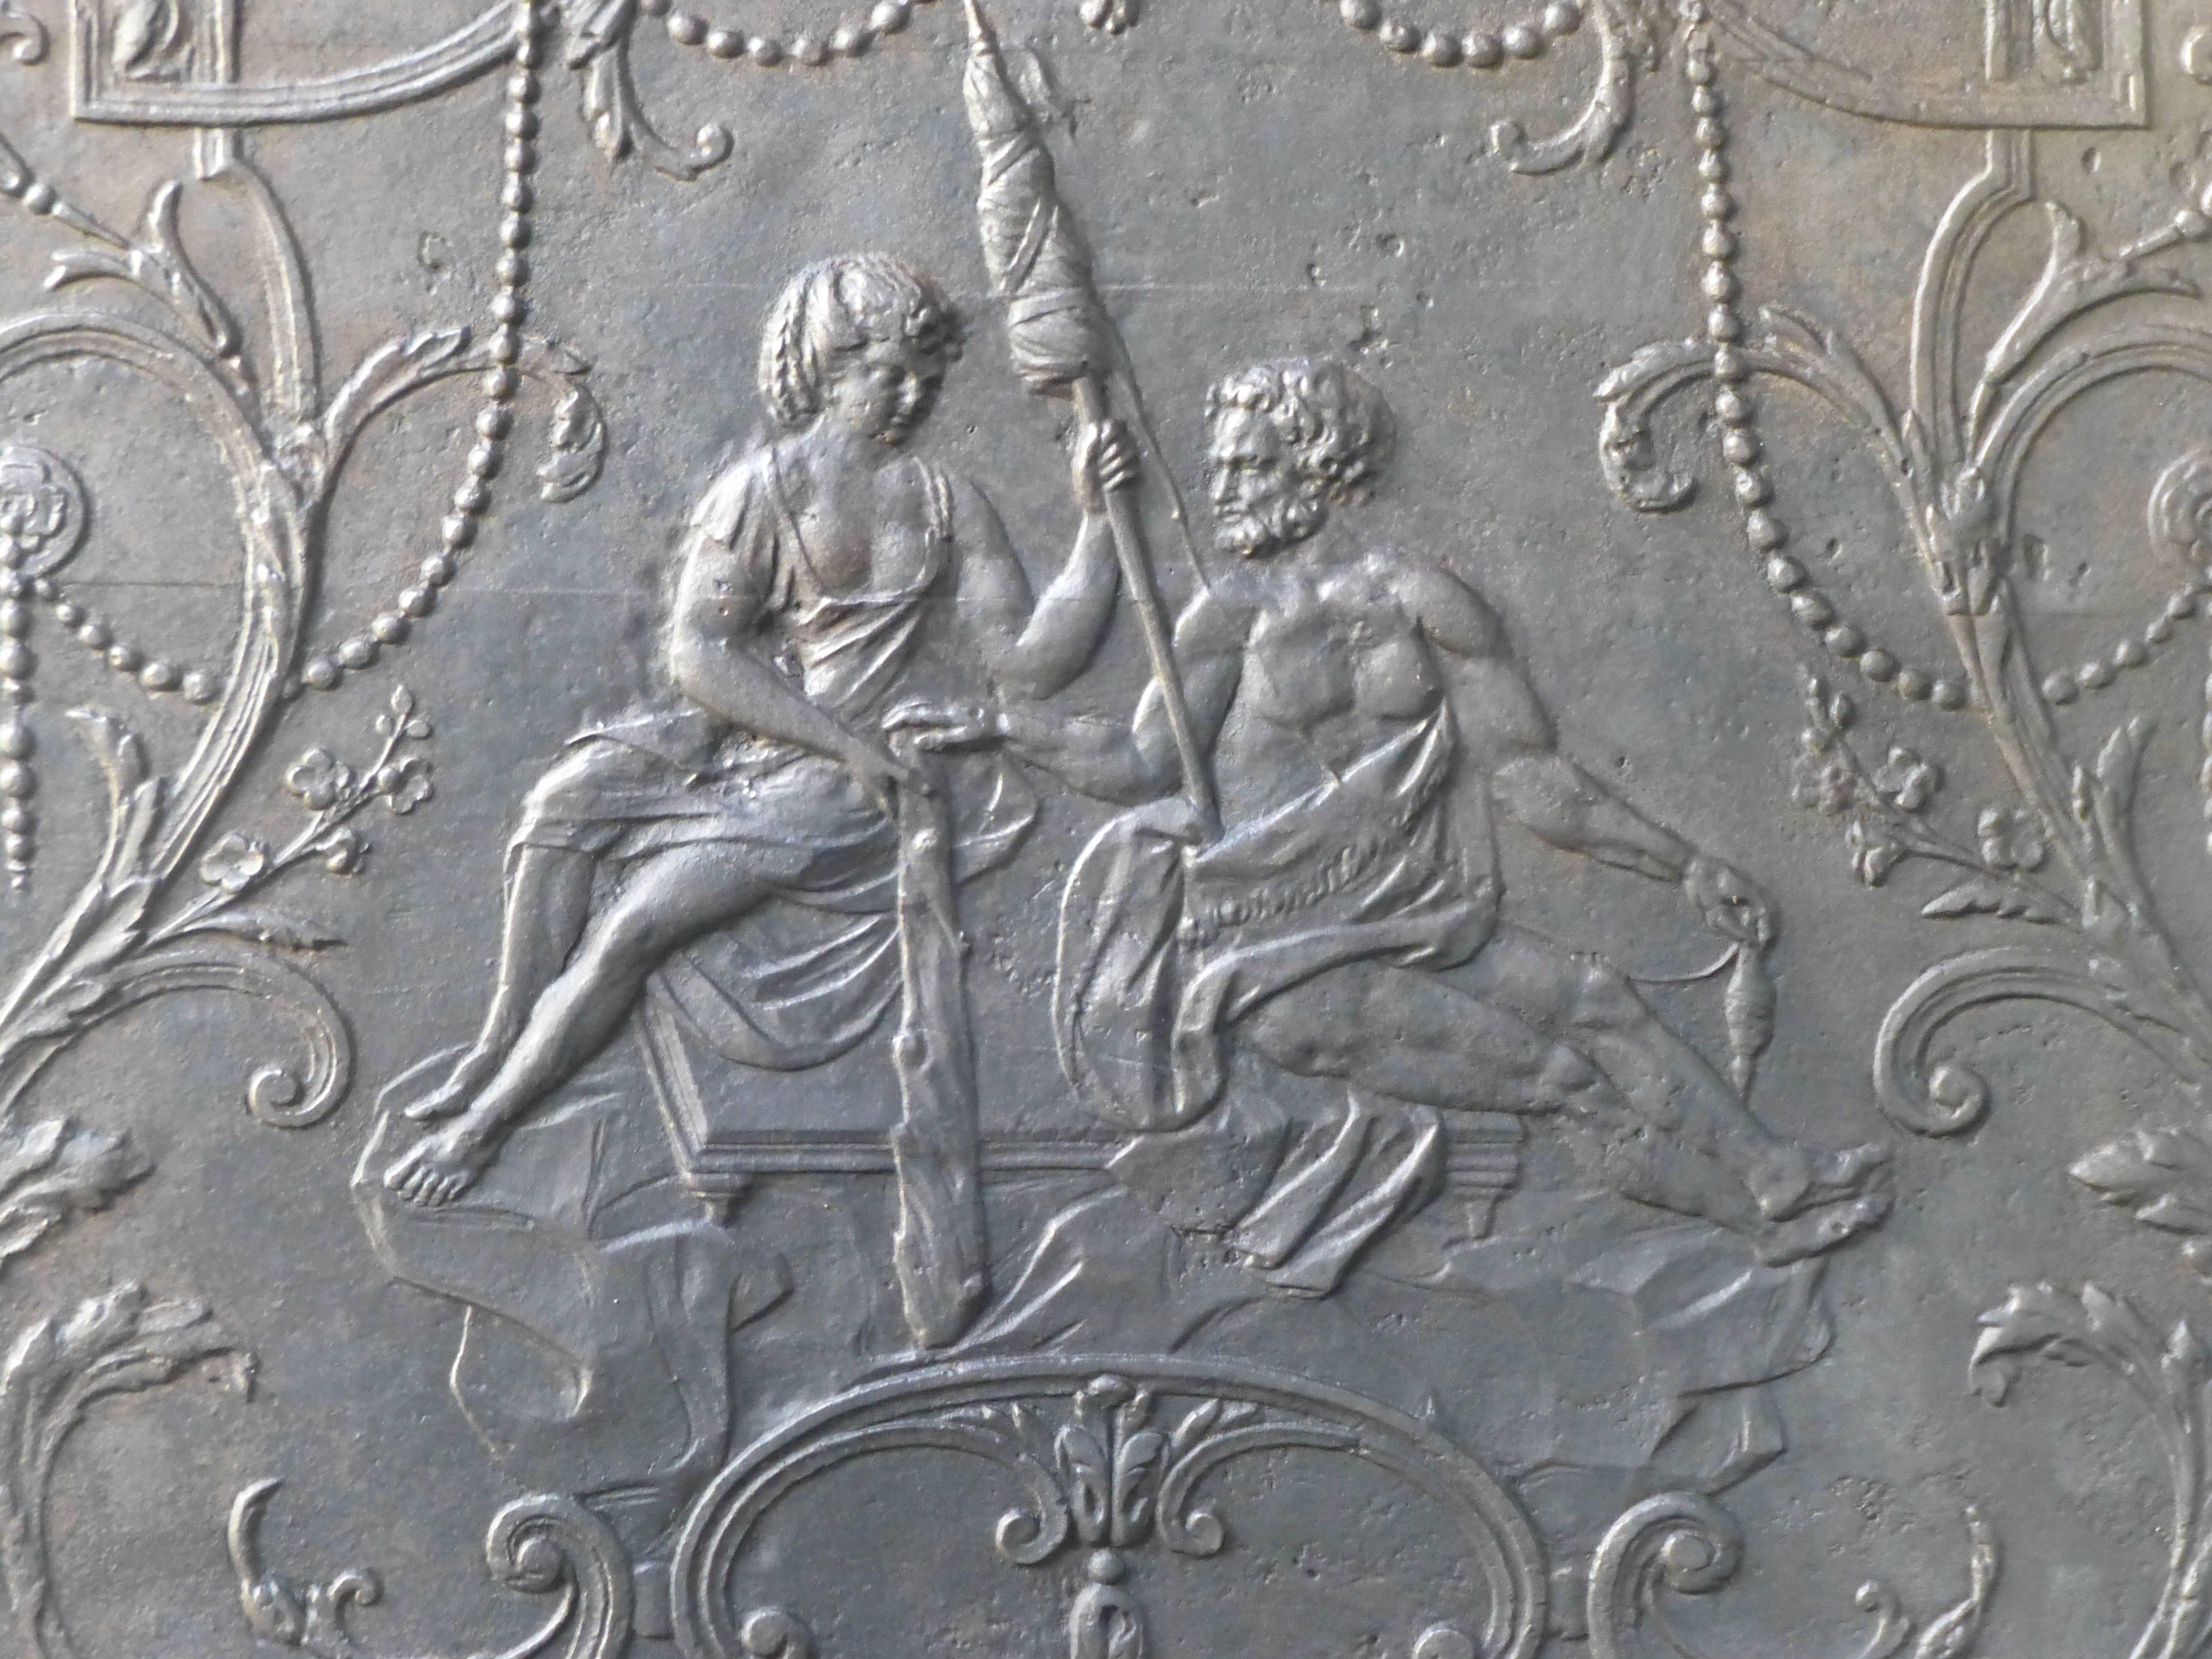 Hercules spinning at Omphale's feet. Hercules disguised as a woman was sold by Mercury (god of commerce) as a slave to Omphale. Hercules and Omphale fell in love and had a son, the first Lydian king, founder of the dynasty of Heraclides.